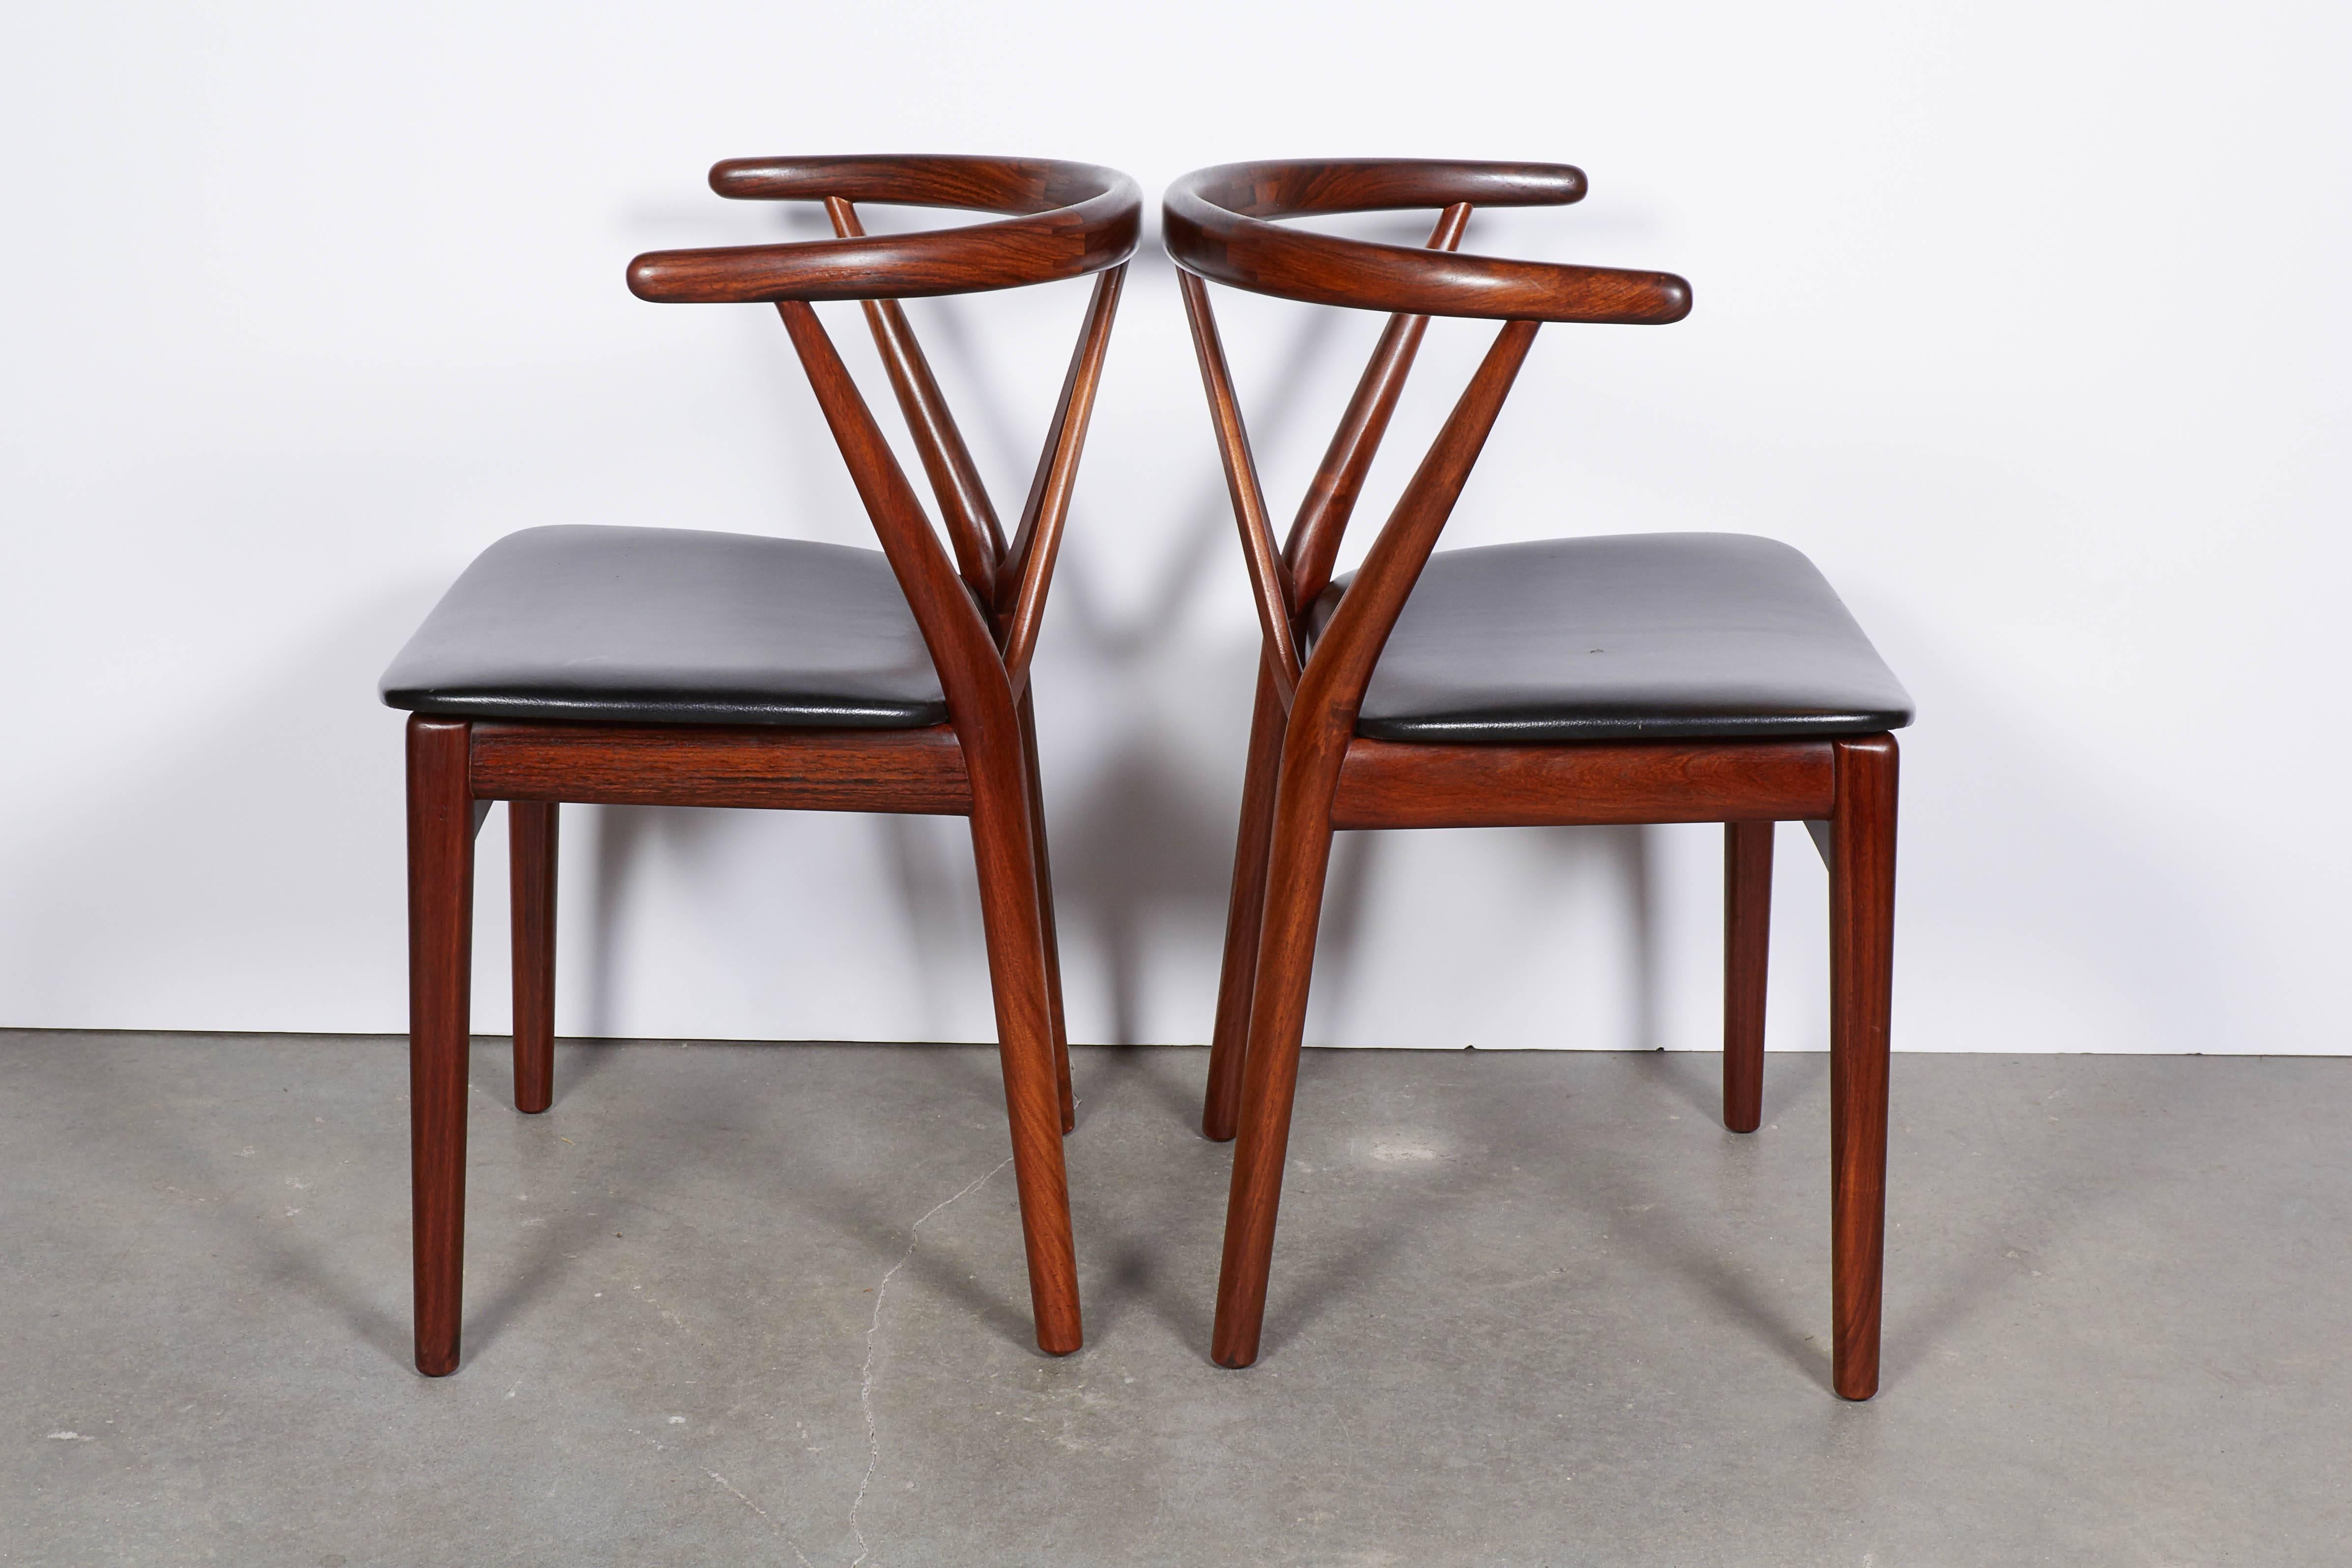 Vintage 1960s Rosewood Dining Chairs, set of 4

This set of 4 Danish dining chairs are in excellent condition. The arms offer great support and can also be used as extra occasional chairs. Ready for pick up, delivery, or shipping anywhere in the